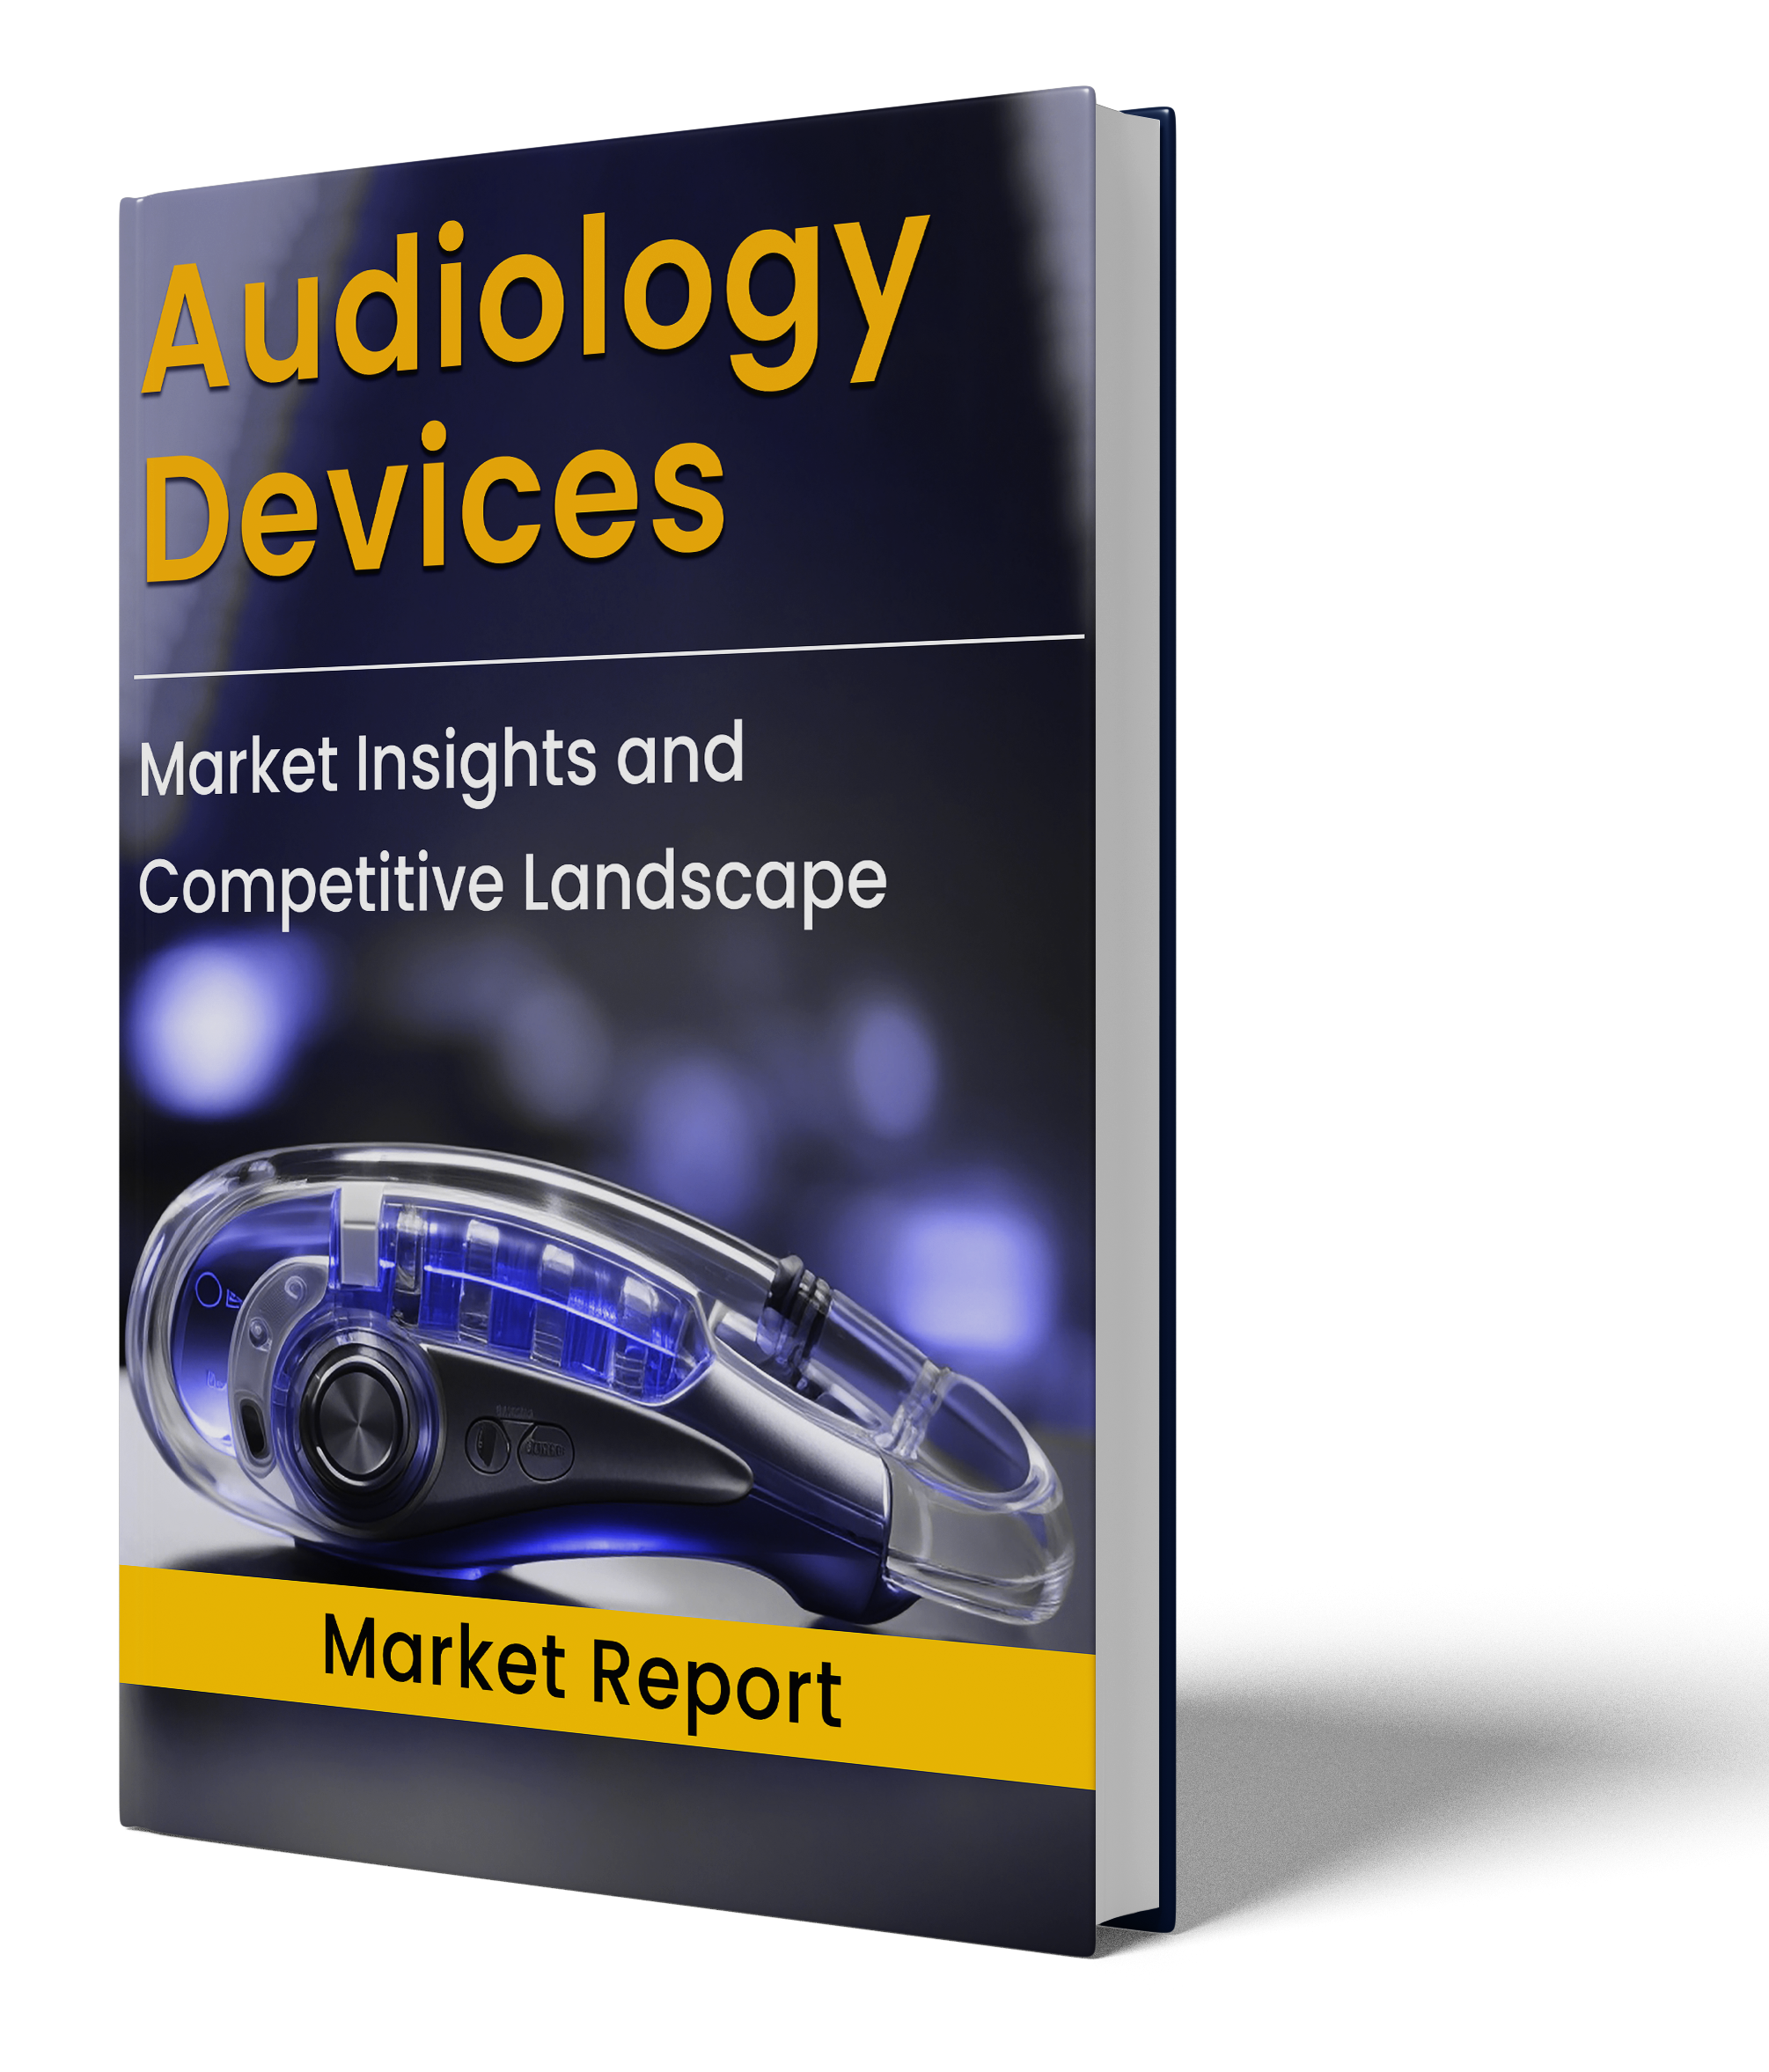 Audiology Devices Market Outlook